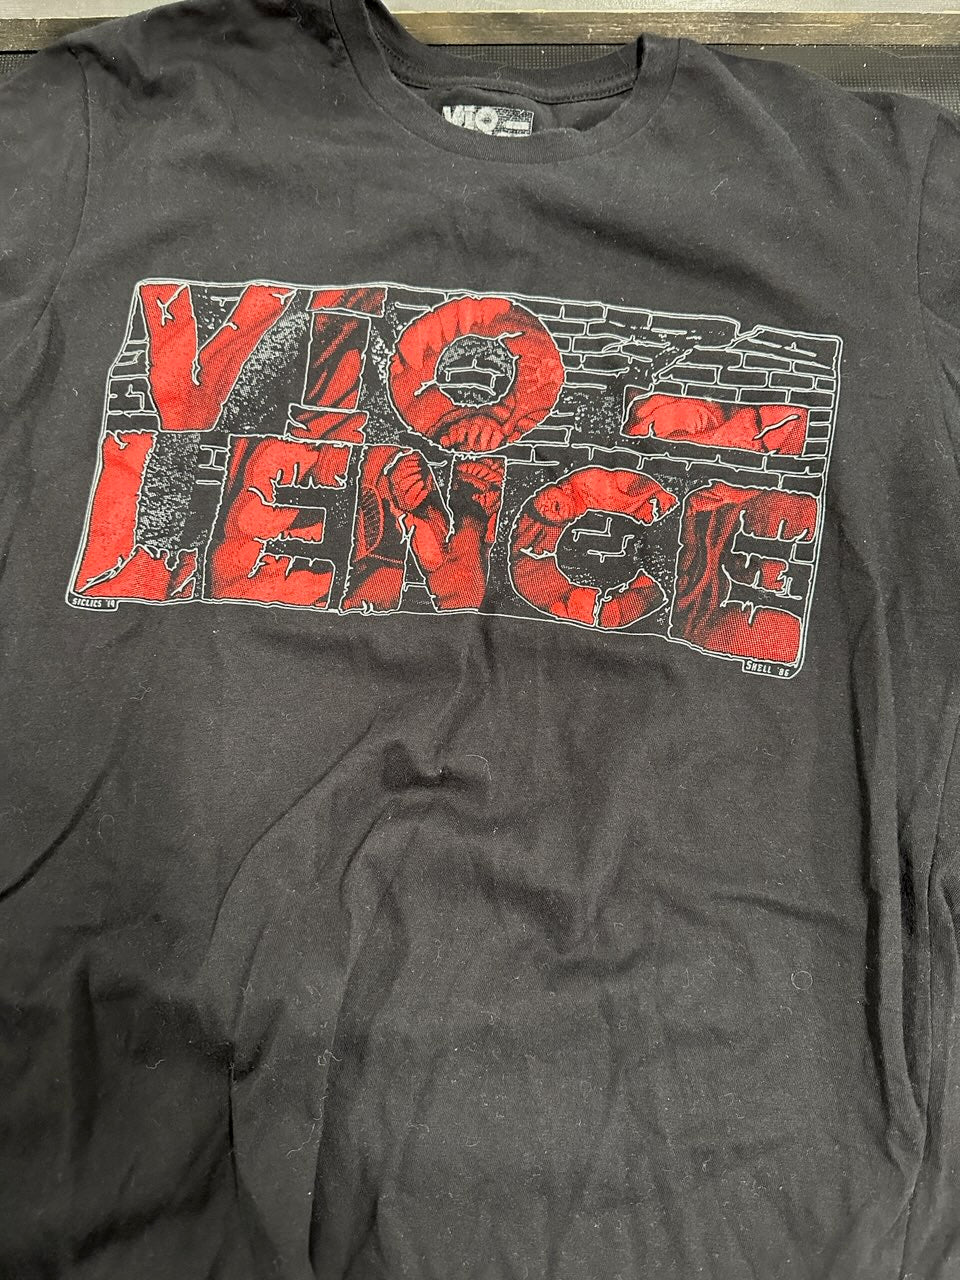 Vio-lence Over The Edge With A Straight Jacket On T-Shirt, Blk, M